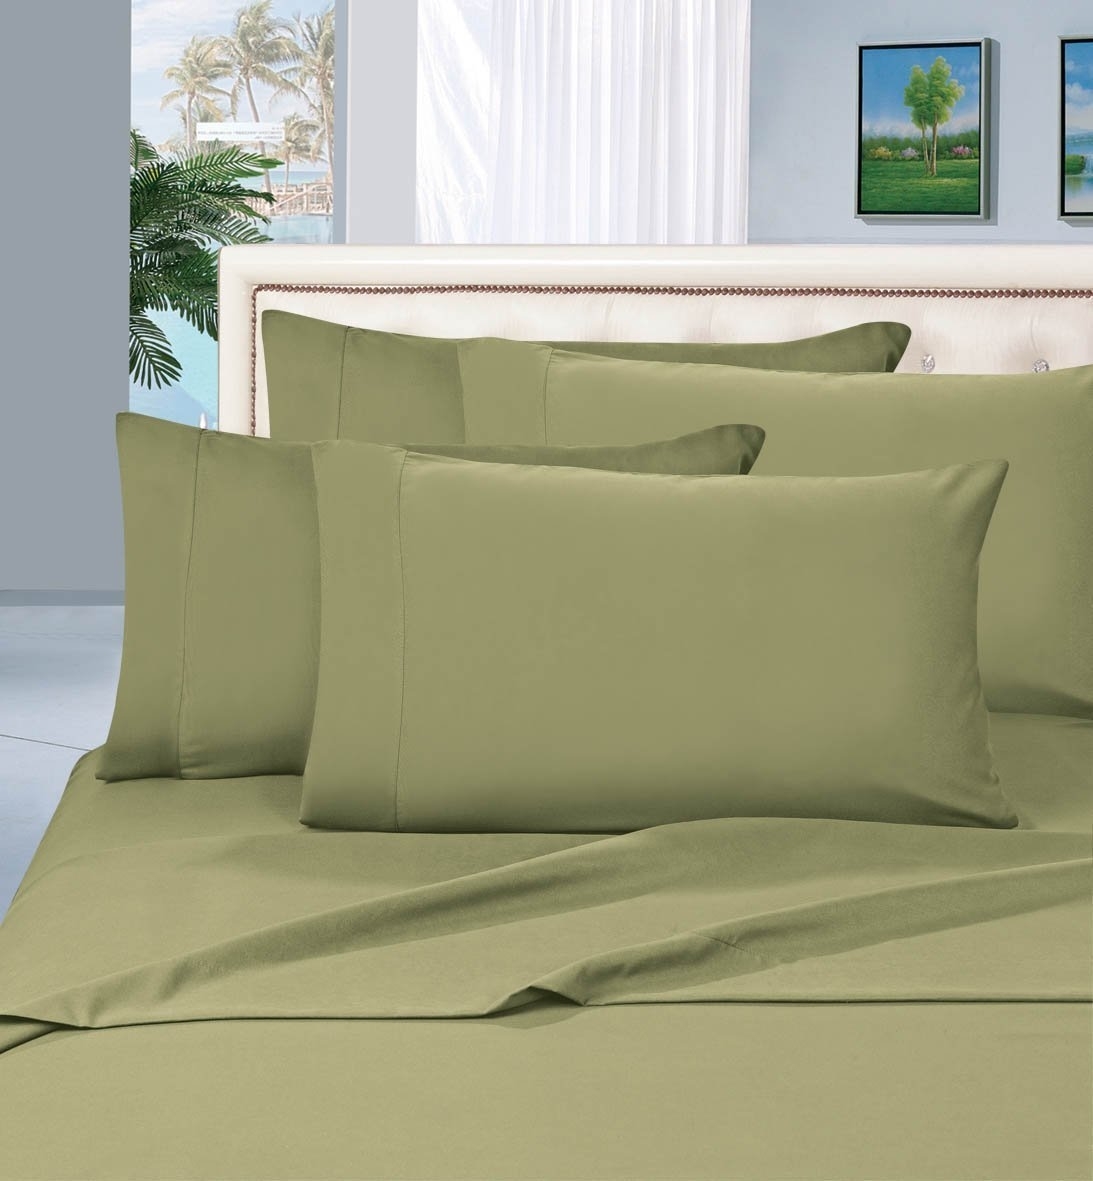 Elegant Comfort 1500 Series Wrinkle Resistant Egyptian Quality Hypoallergenic Ultra Soft Luxury 4-piece Bed Sheet Set, Queen, Sage-green